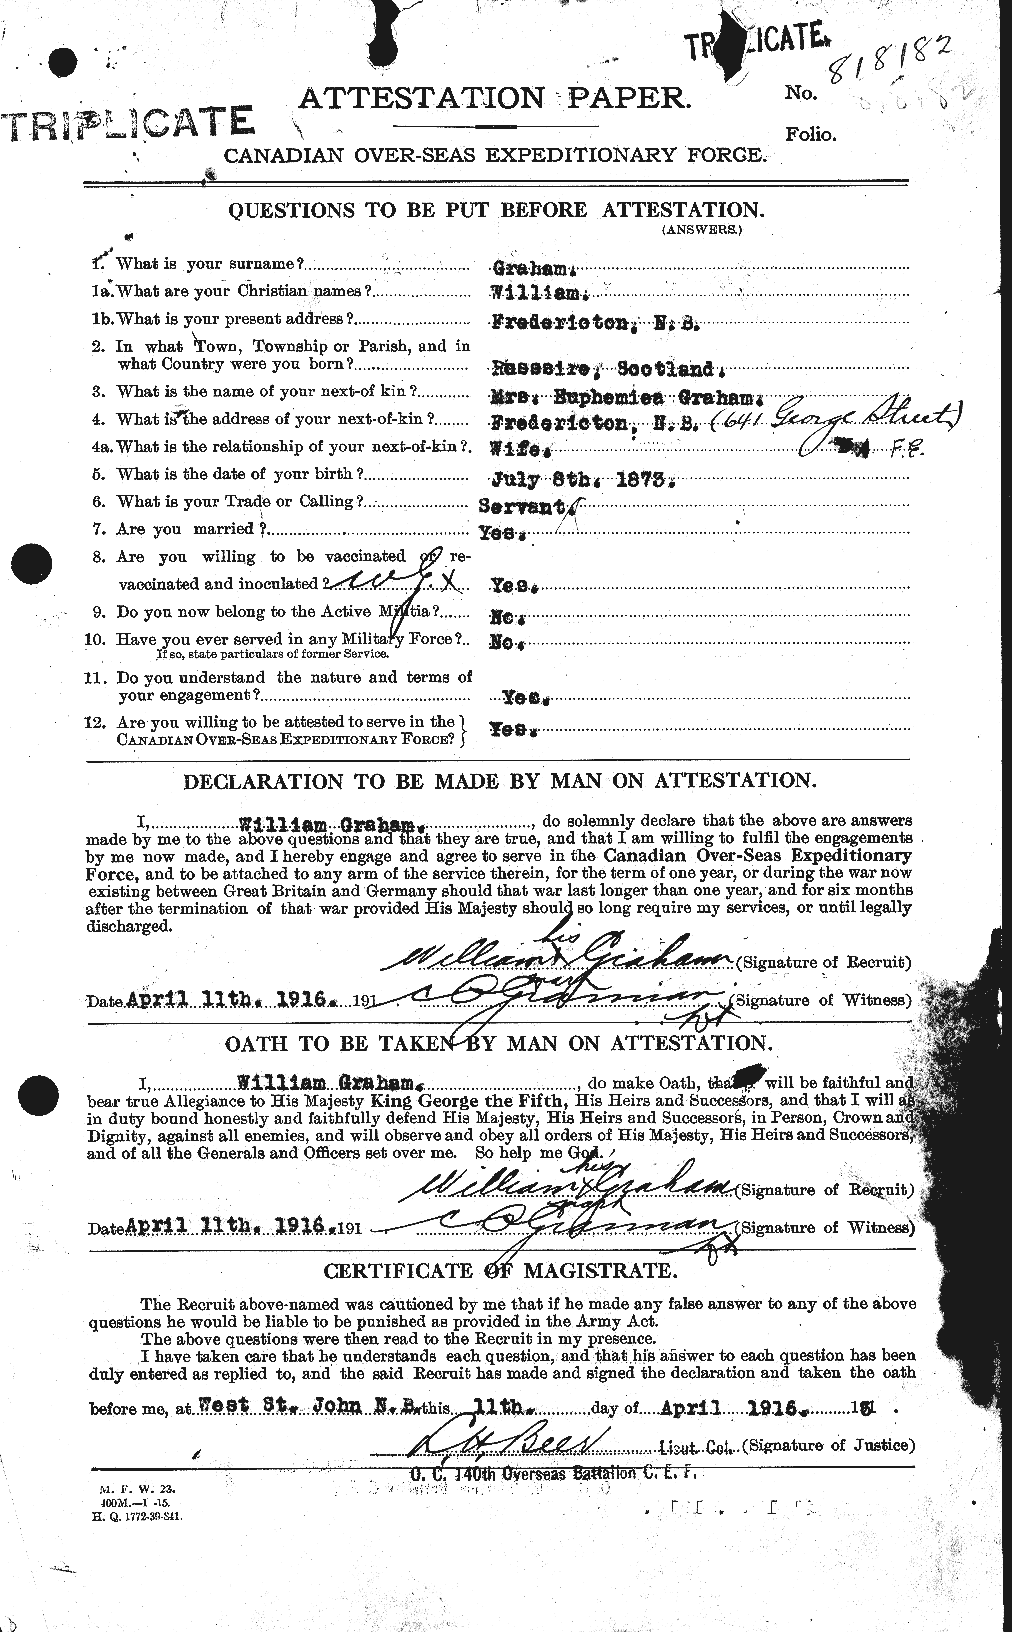 Personnel Records of the First World War - CEF 362682a